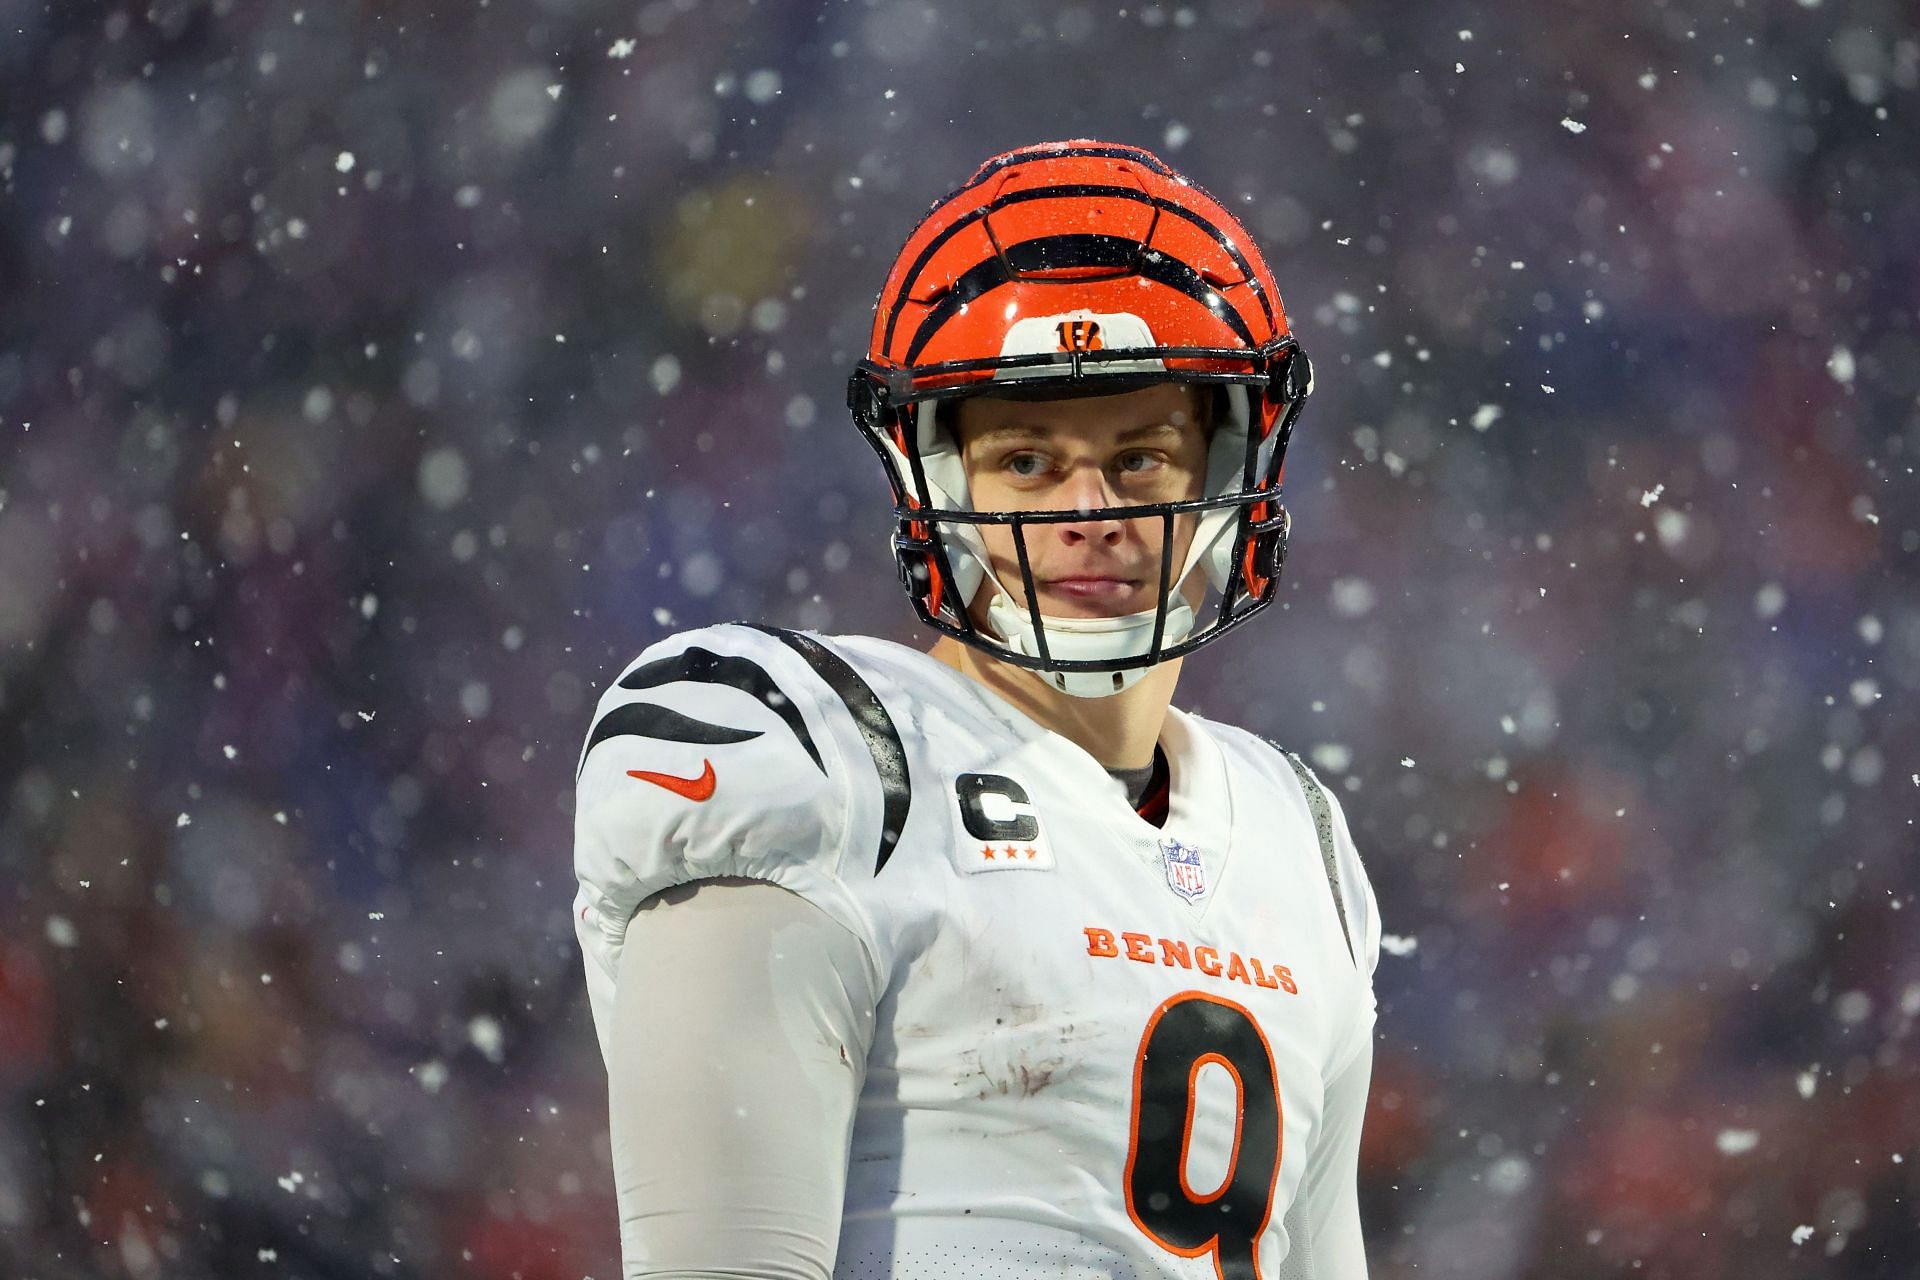 Bengals owner talks challenges of keeping Joe Burrow, Tee Higgins, Ja'Marr  Chase: 'Will be pressed to fit them all in'